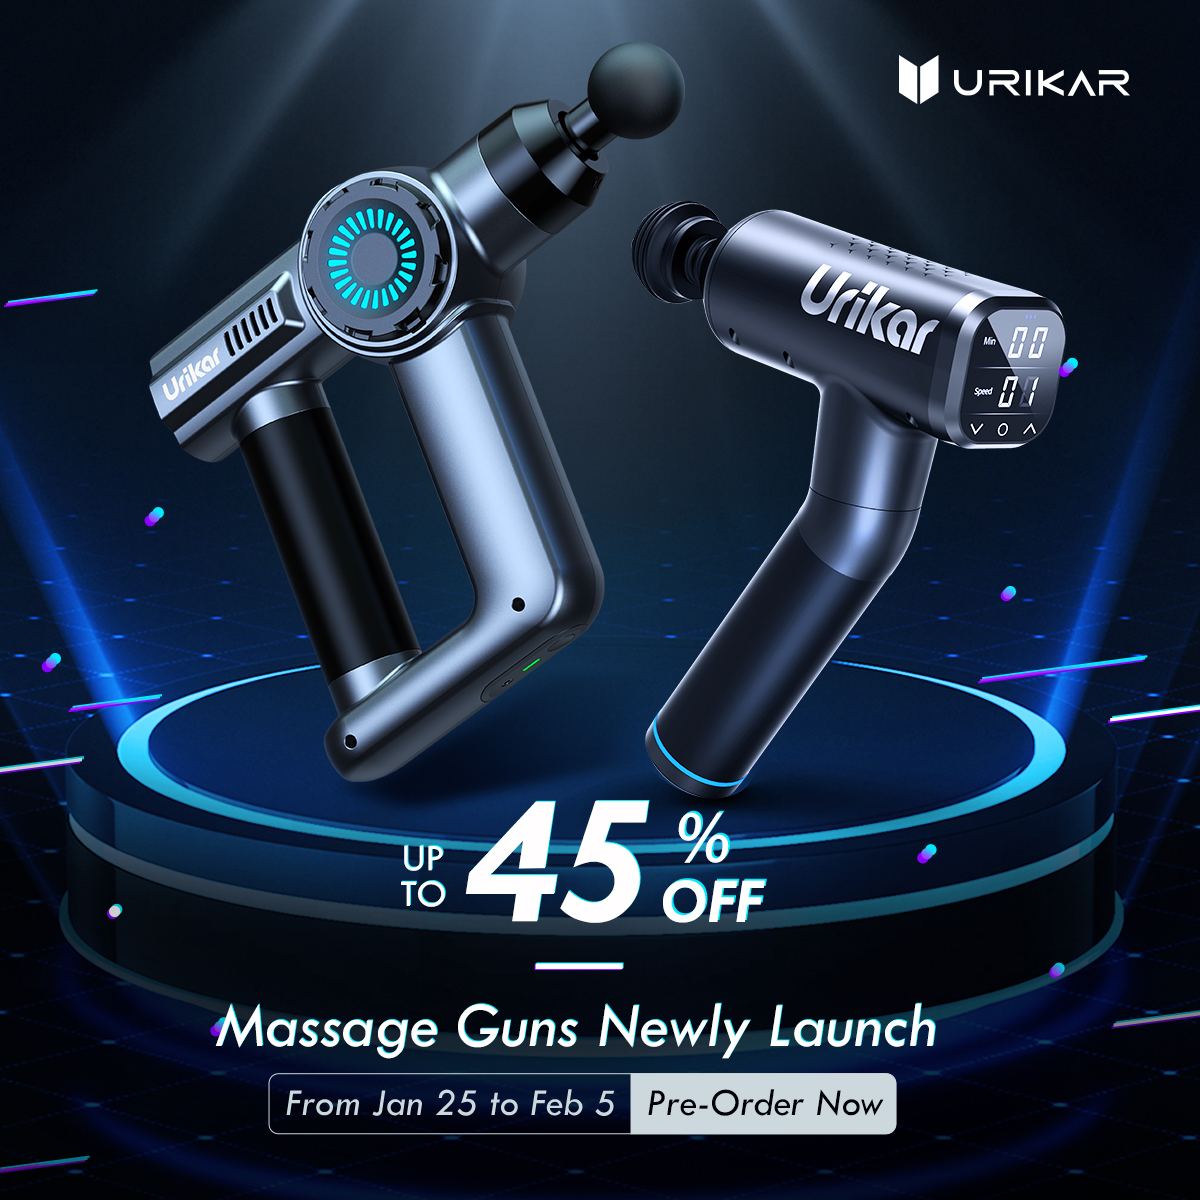 URIKAR - the Most Advanced & Powerful Percussion Massager with AI Chip for Daily Stress Relief and Workout Recovery